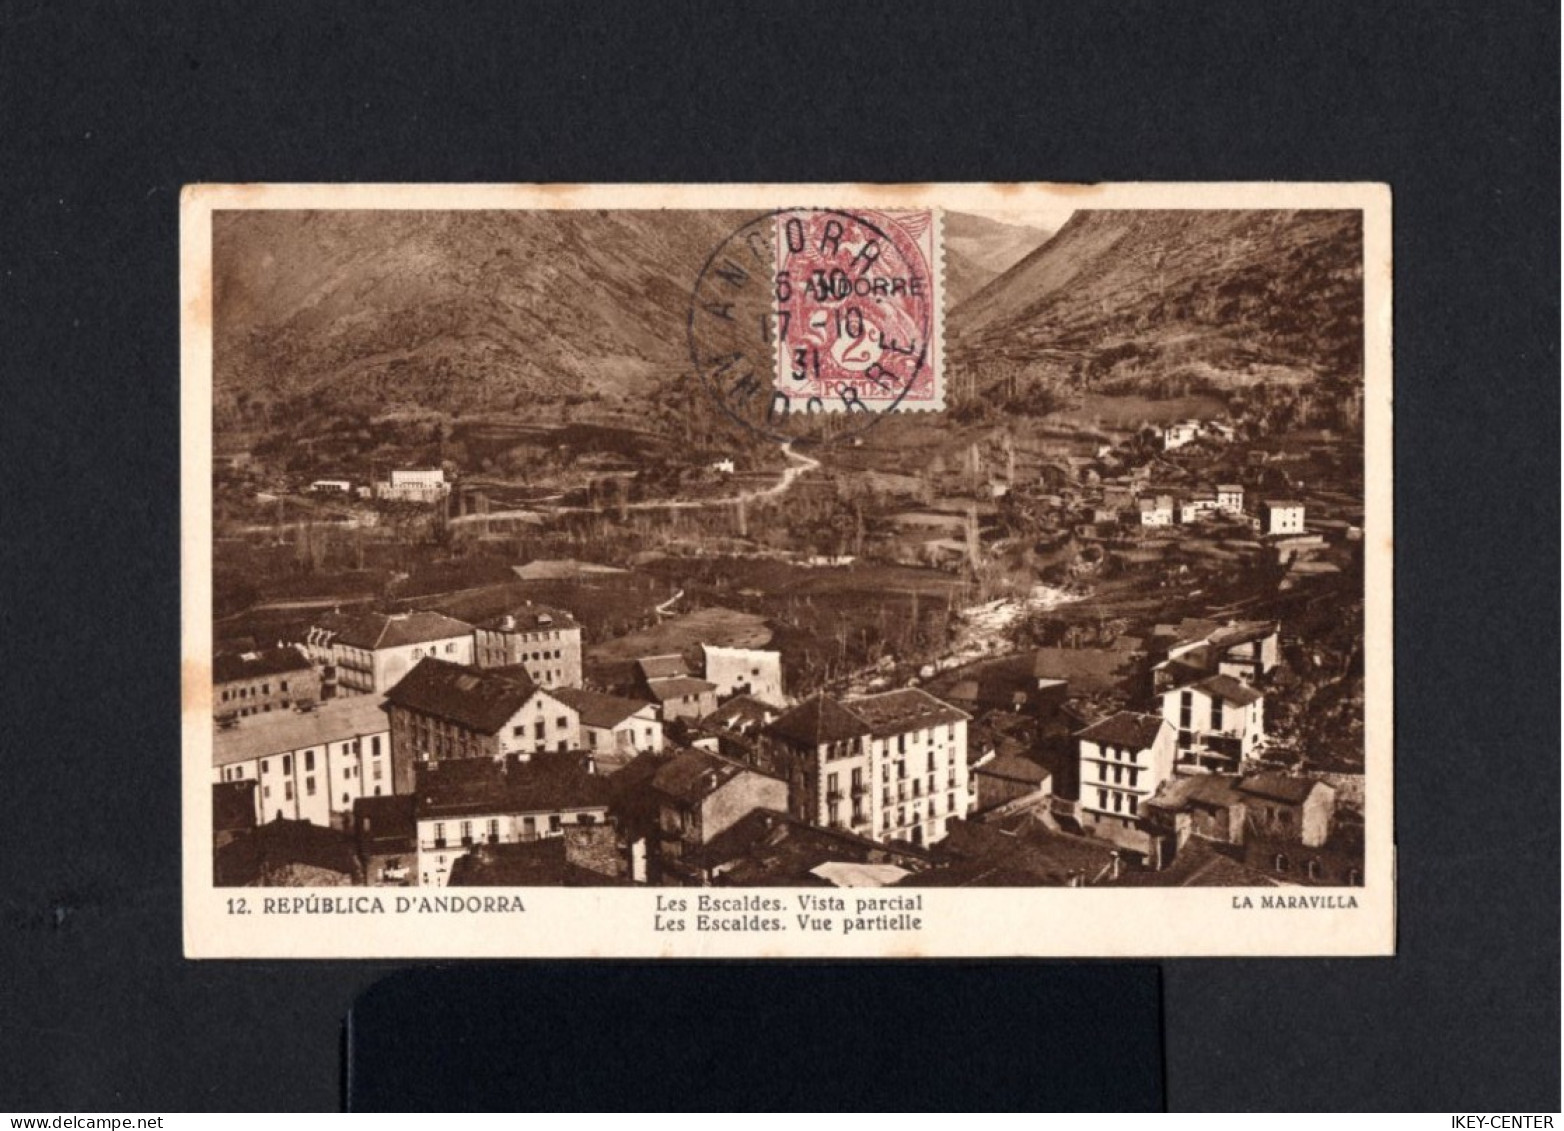 S2996-FRENCH ANDORRE-OLD POSTCARD LES ESCALDES.1931.WWII.Tarjeta Postal.carte Postale.TARJETA POSTAL Andorra - Covers & Documents